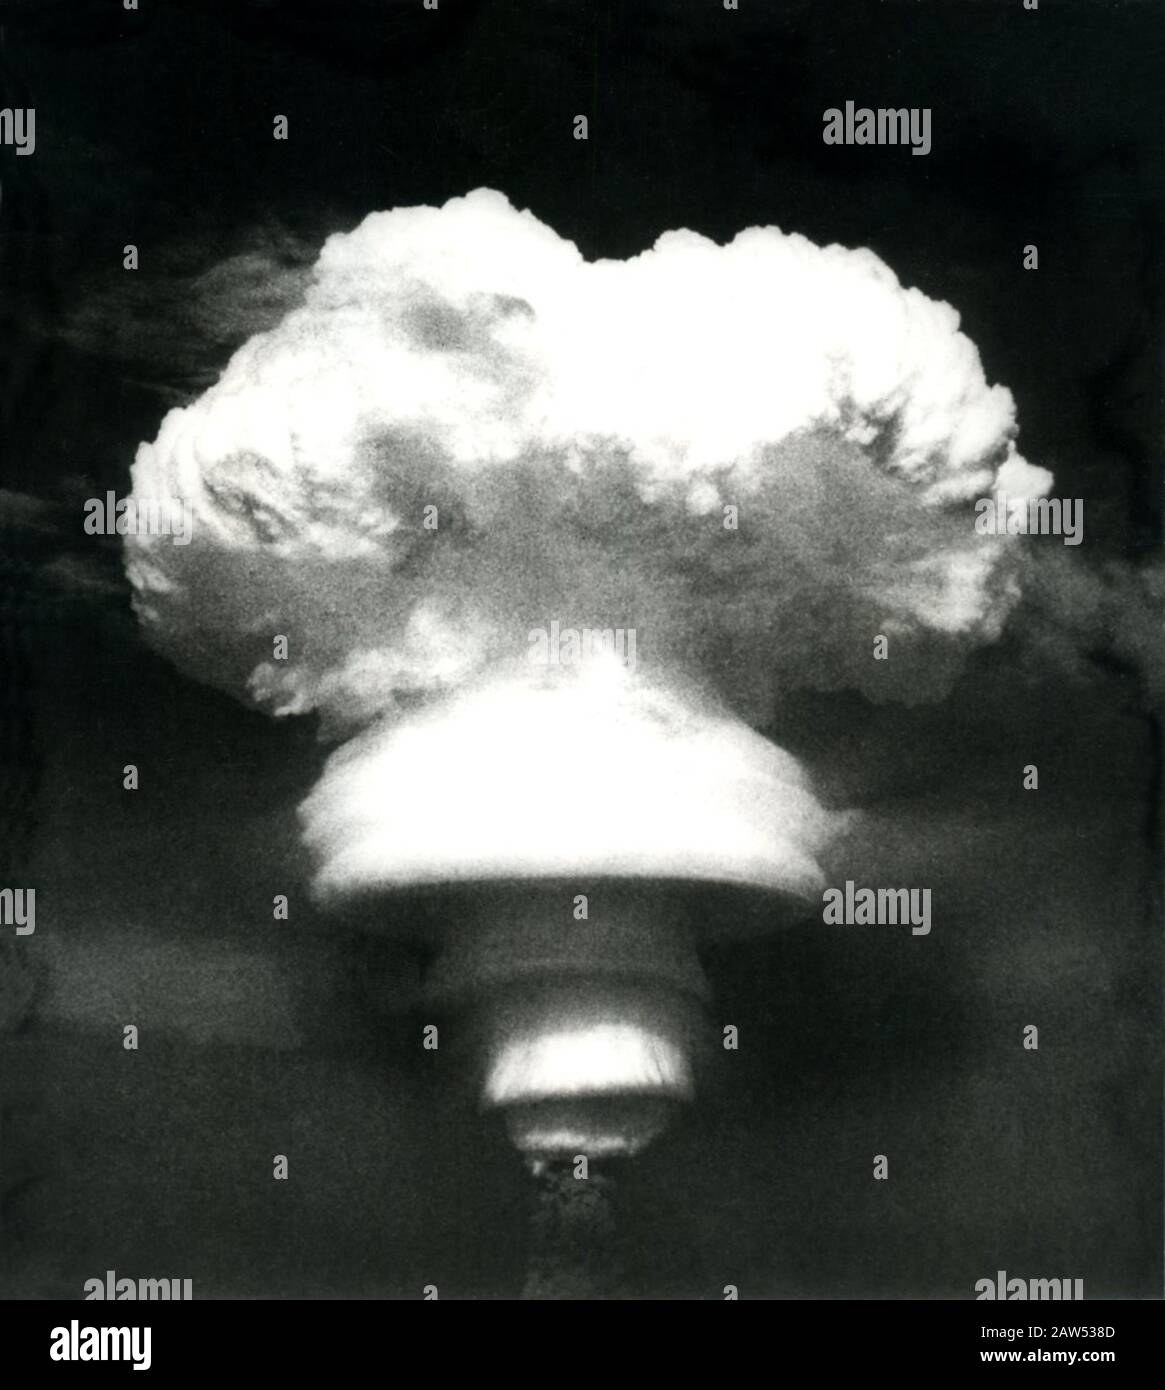 1967 ca , CHINA : Chinish  NUCLEAR TEST - ATTACCO ATOMICO NUCLEARE ENERGIA - ENERGY - NUCLEAR ATTACK -  BOMBA ATOMICA - foto storiche storica - HISTOR Stock Photo